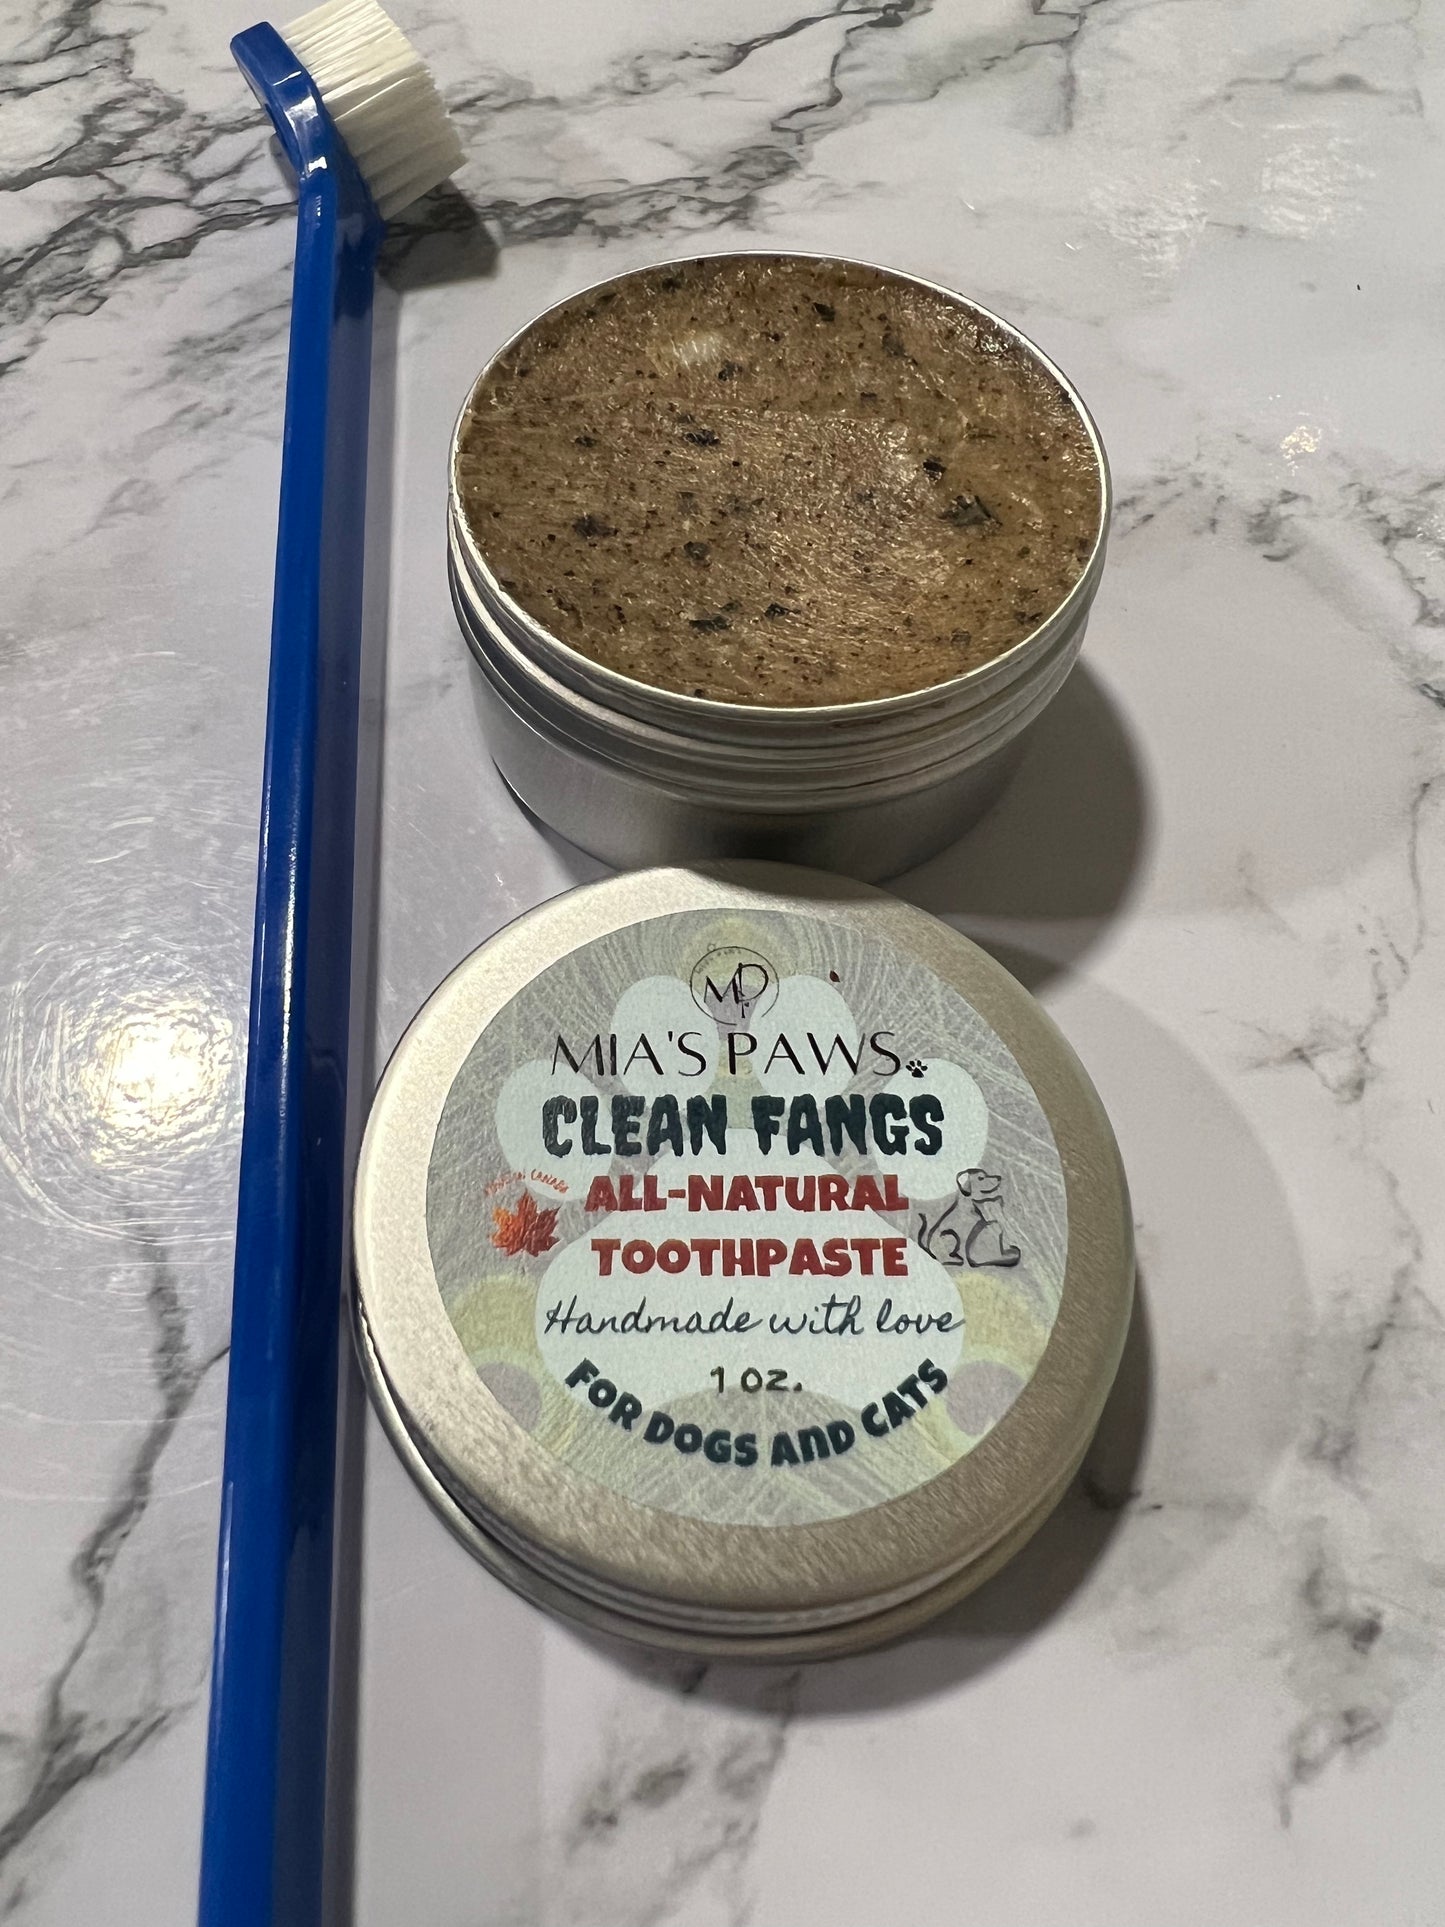 Clean Fangs All Natural Toothpaste - Mia's Paws